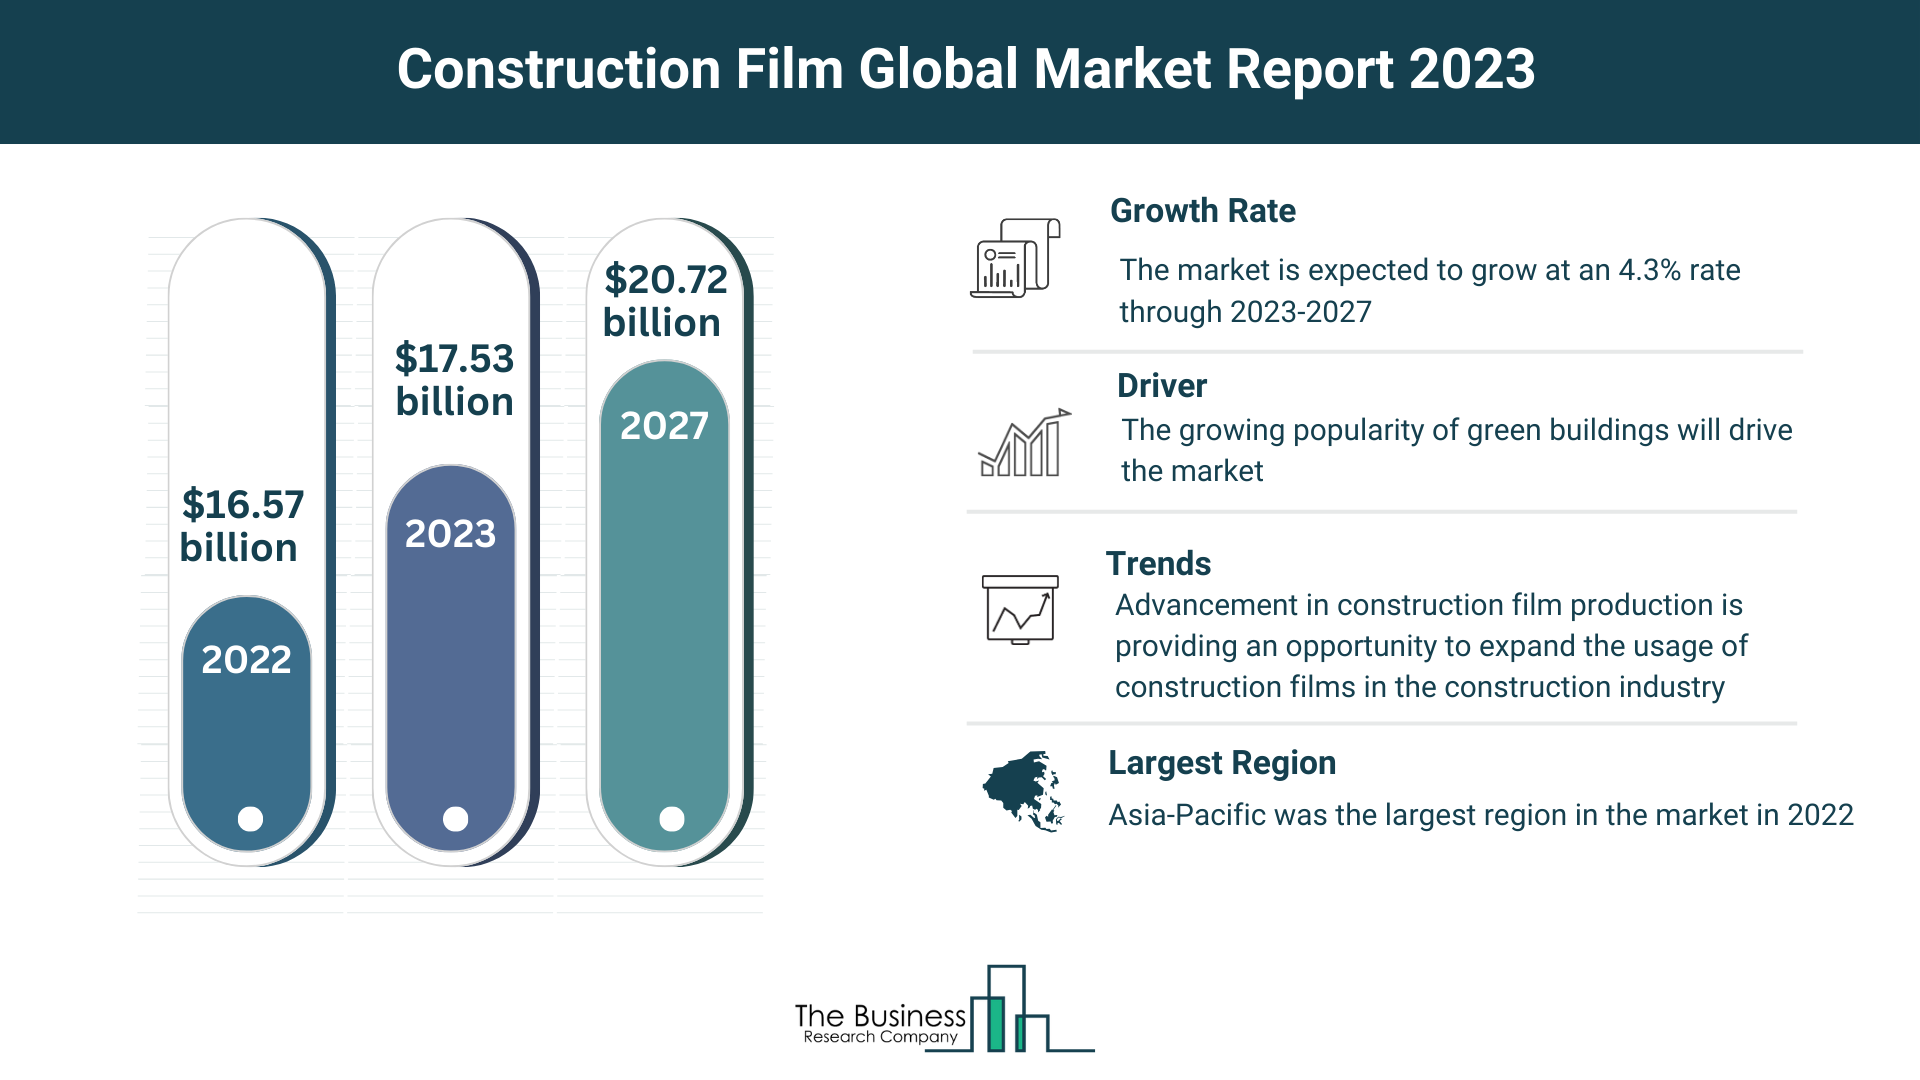 Global Construction Film Market Analysis: Size, Drivers, Trends, Opportunities And Strategies